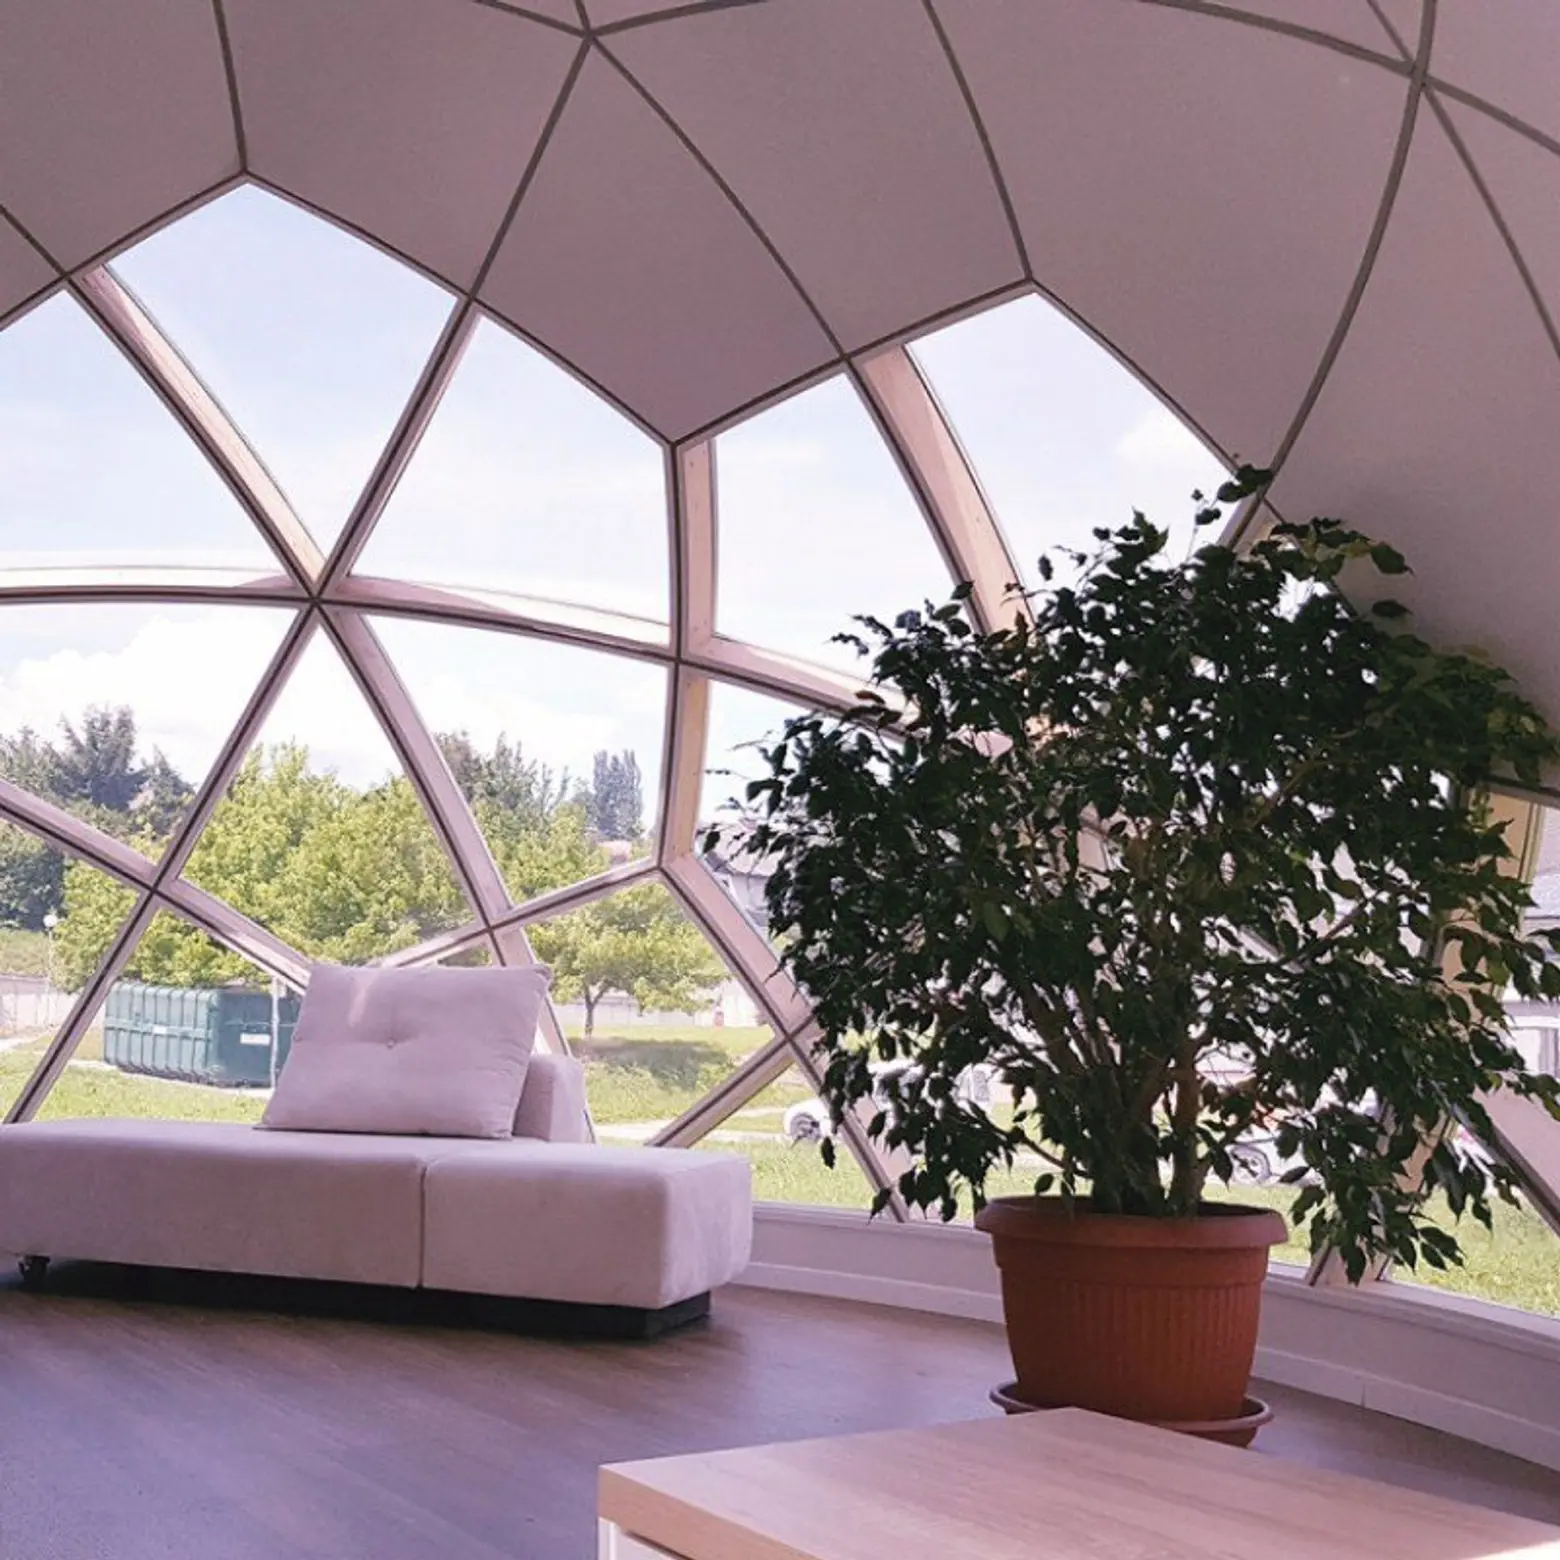 smartdome construction, geodesic domes, diy